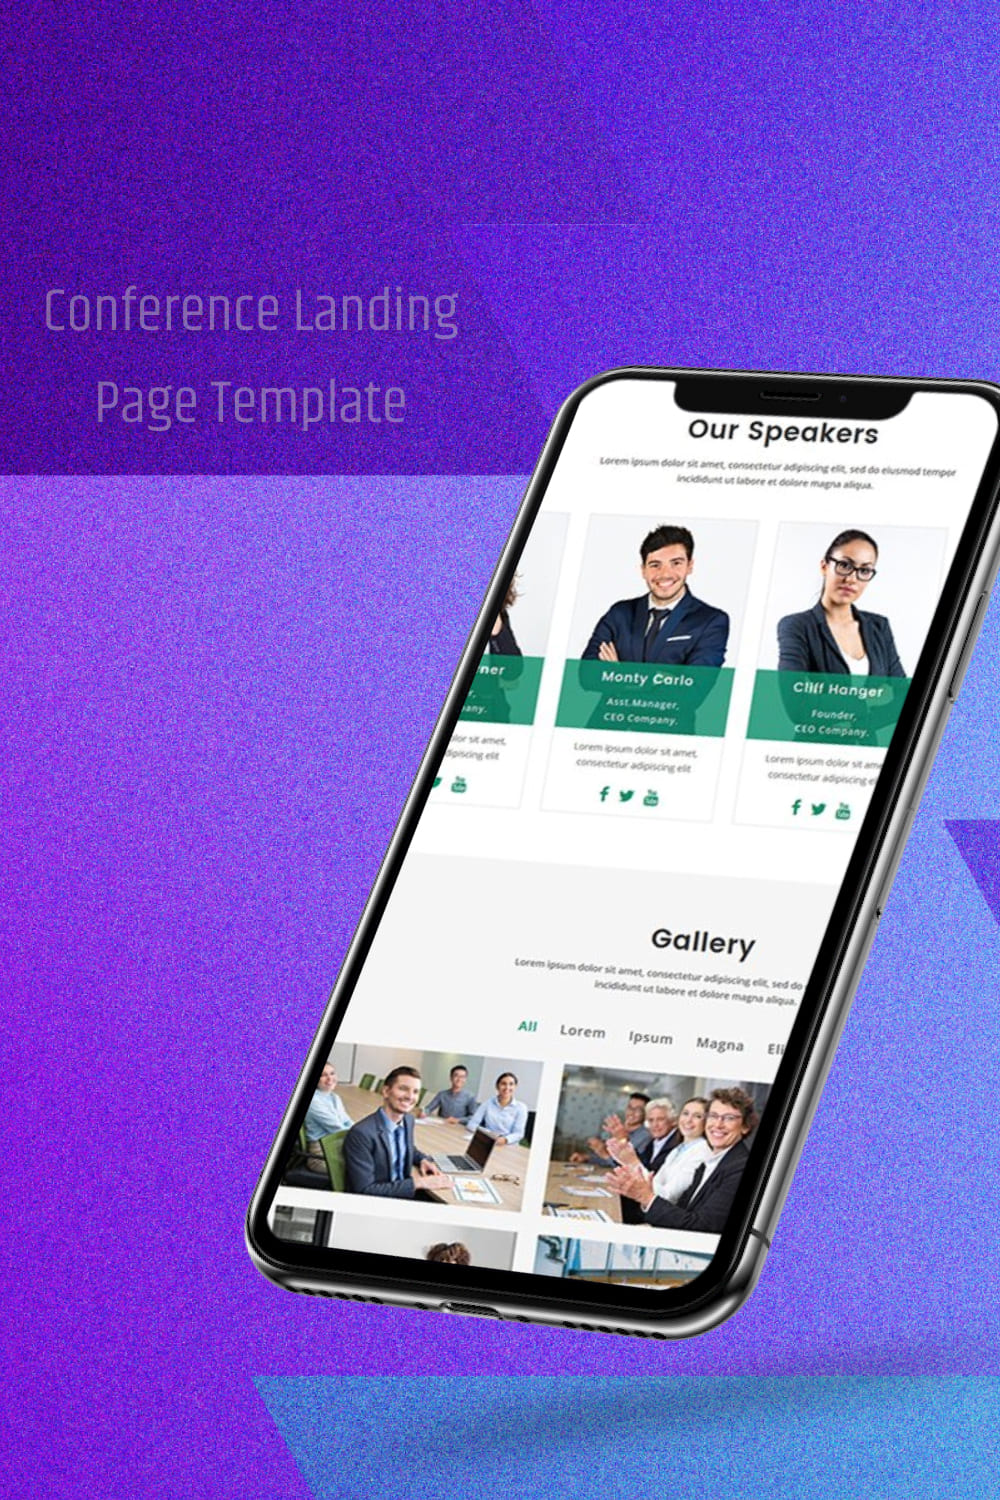 Conference Landing Page Template pinterest image.